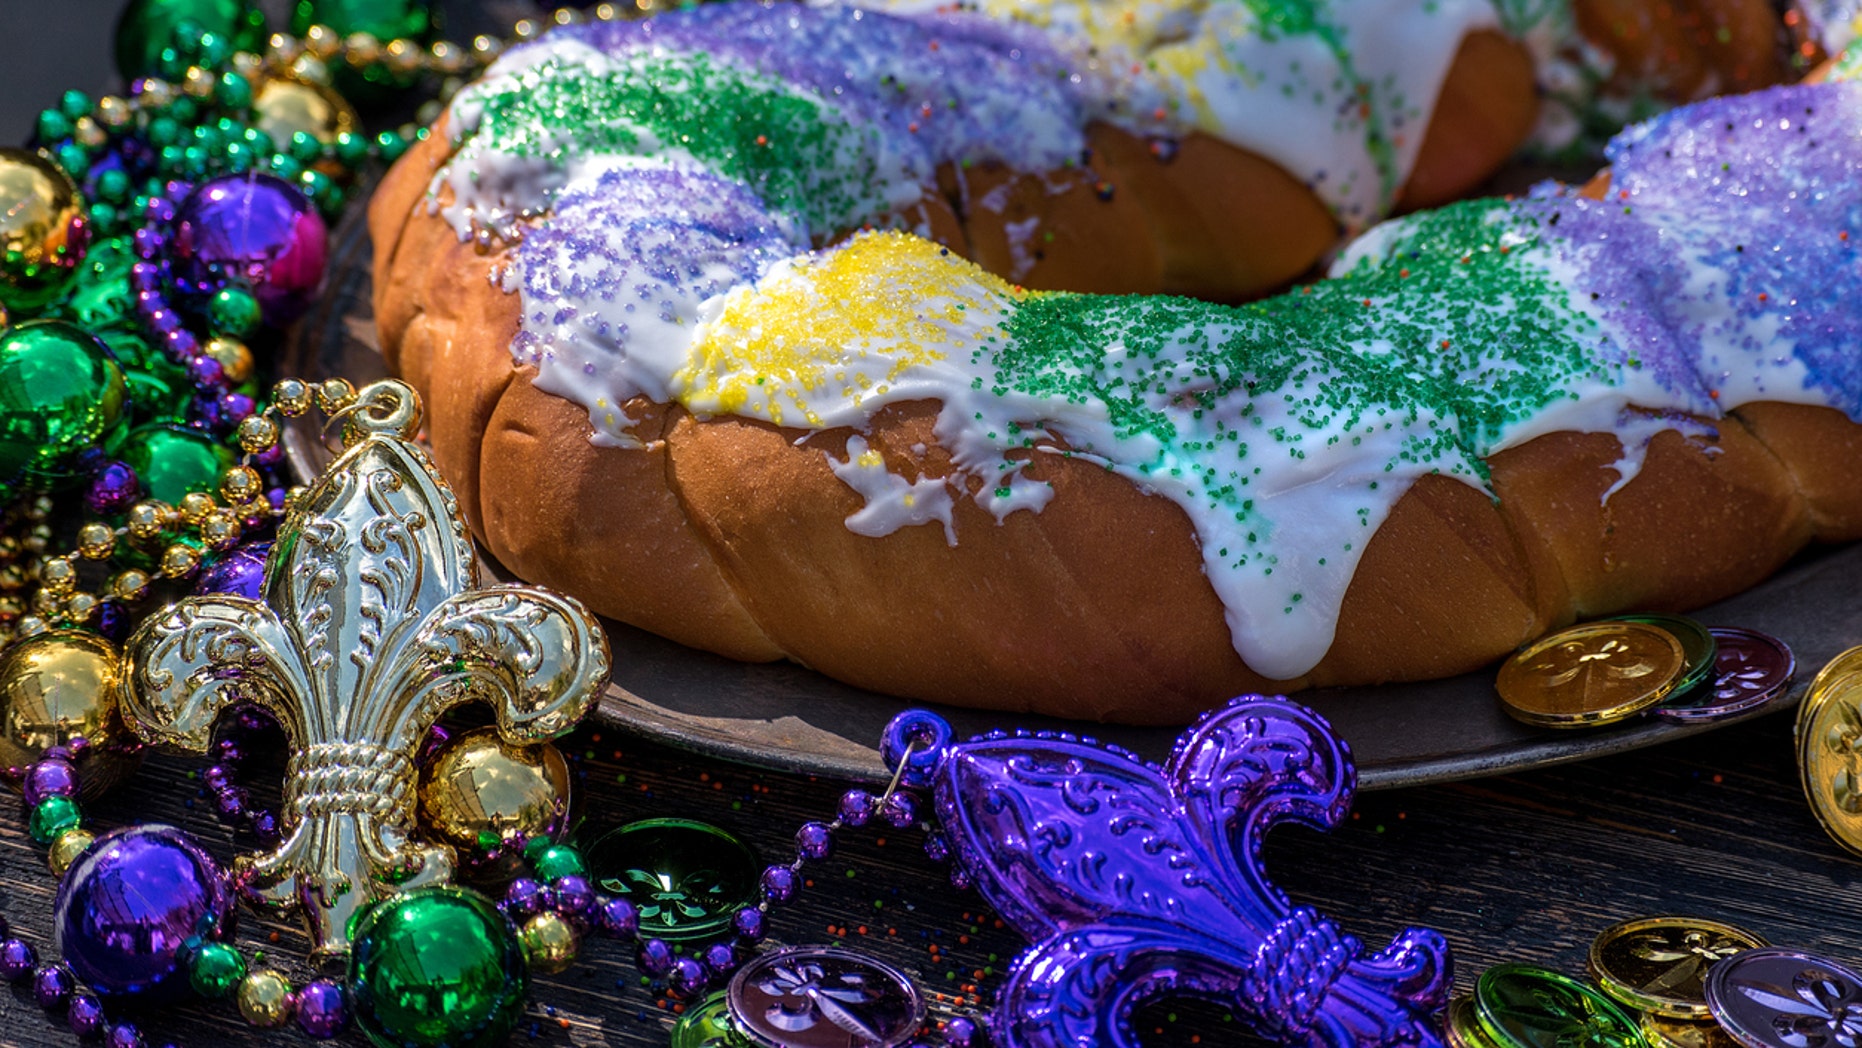 What exactly is the tri-colored confection that makes an appearance at Mardi Gras celebrations across the country?